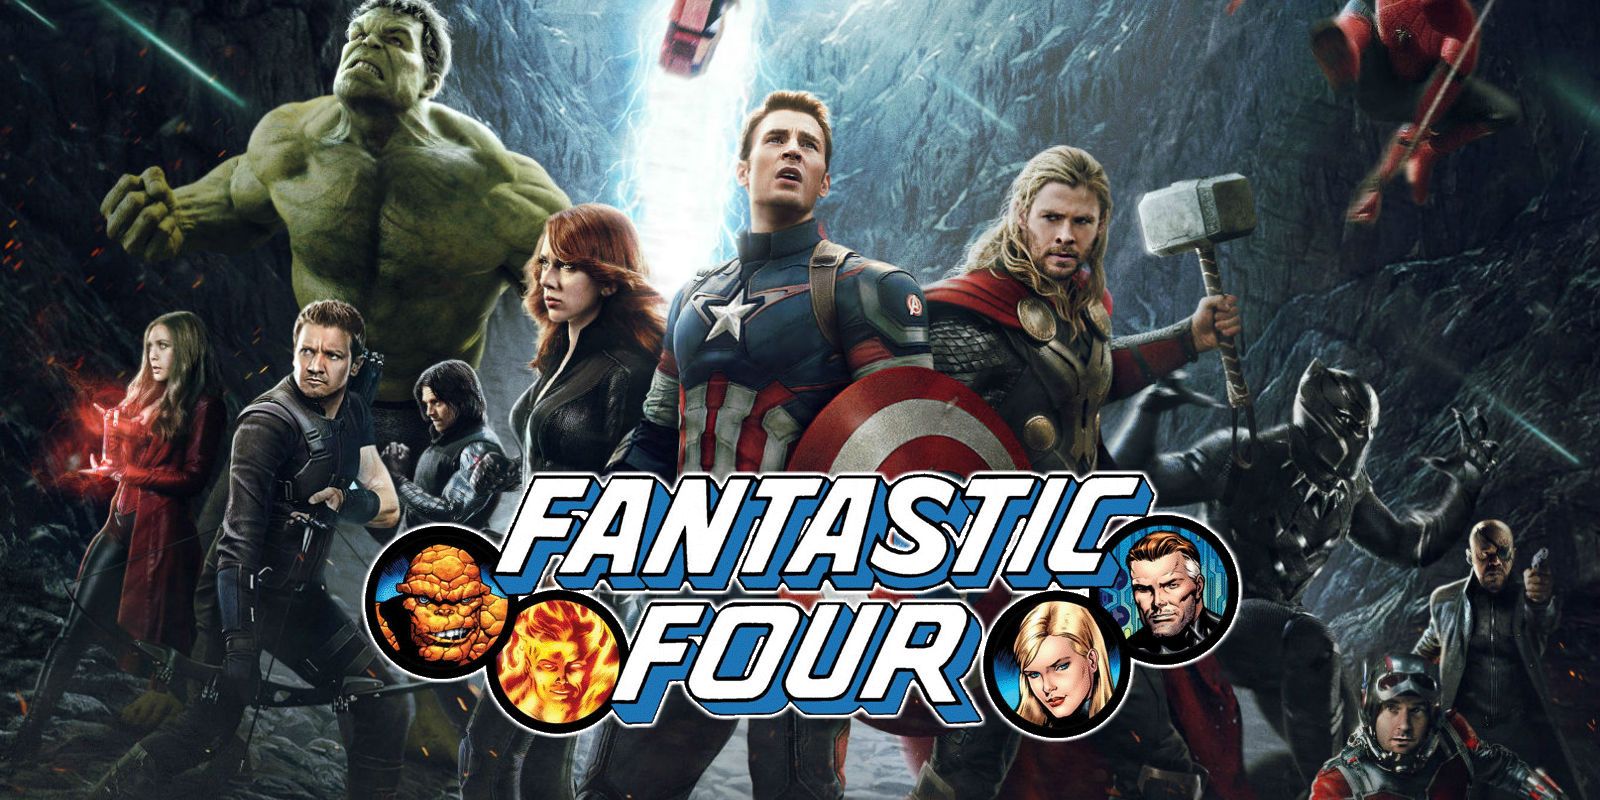 The Fantastic Four Are More Important For The MCU Than The X-Men